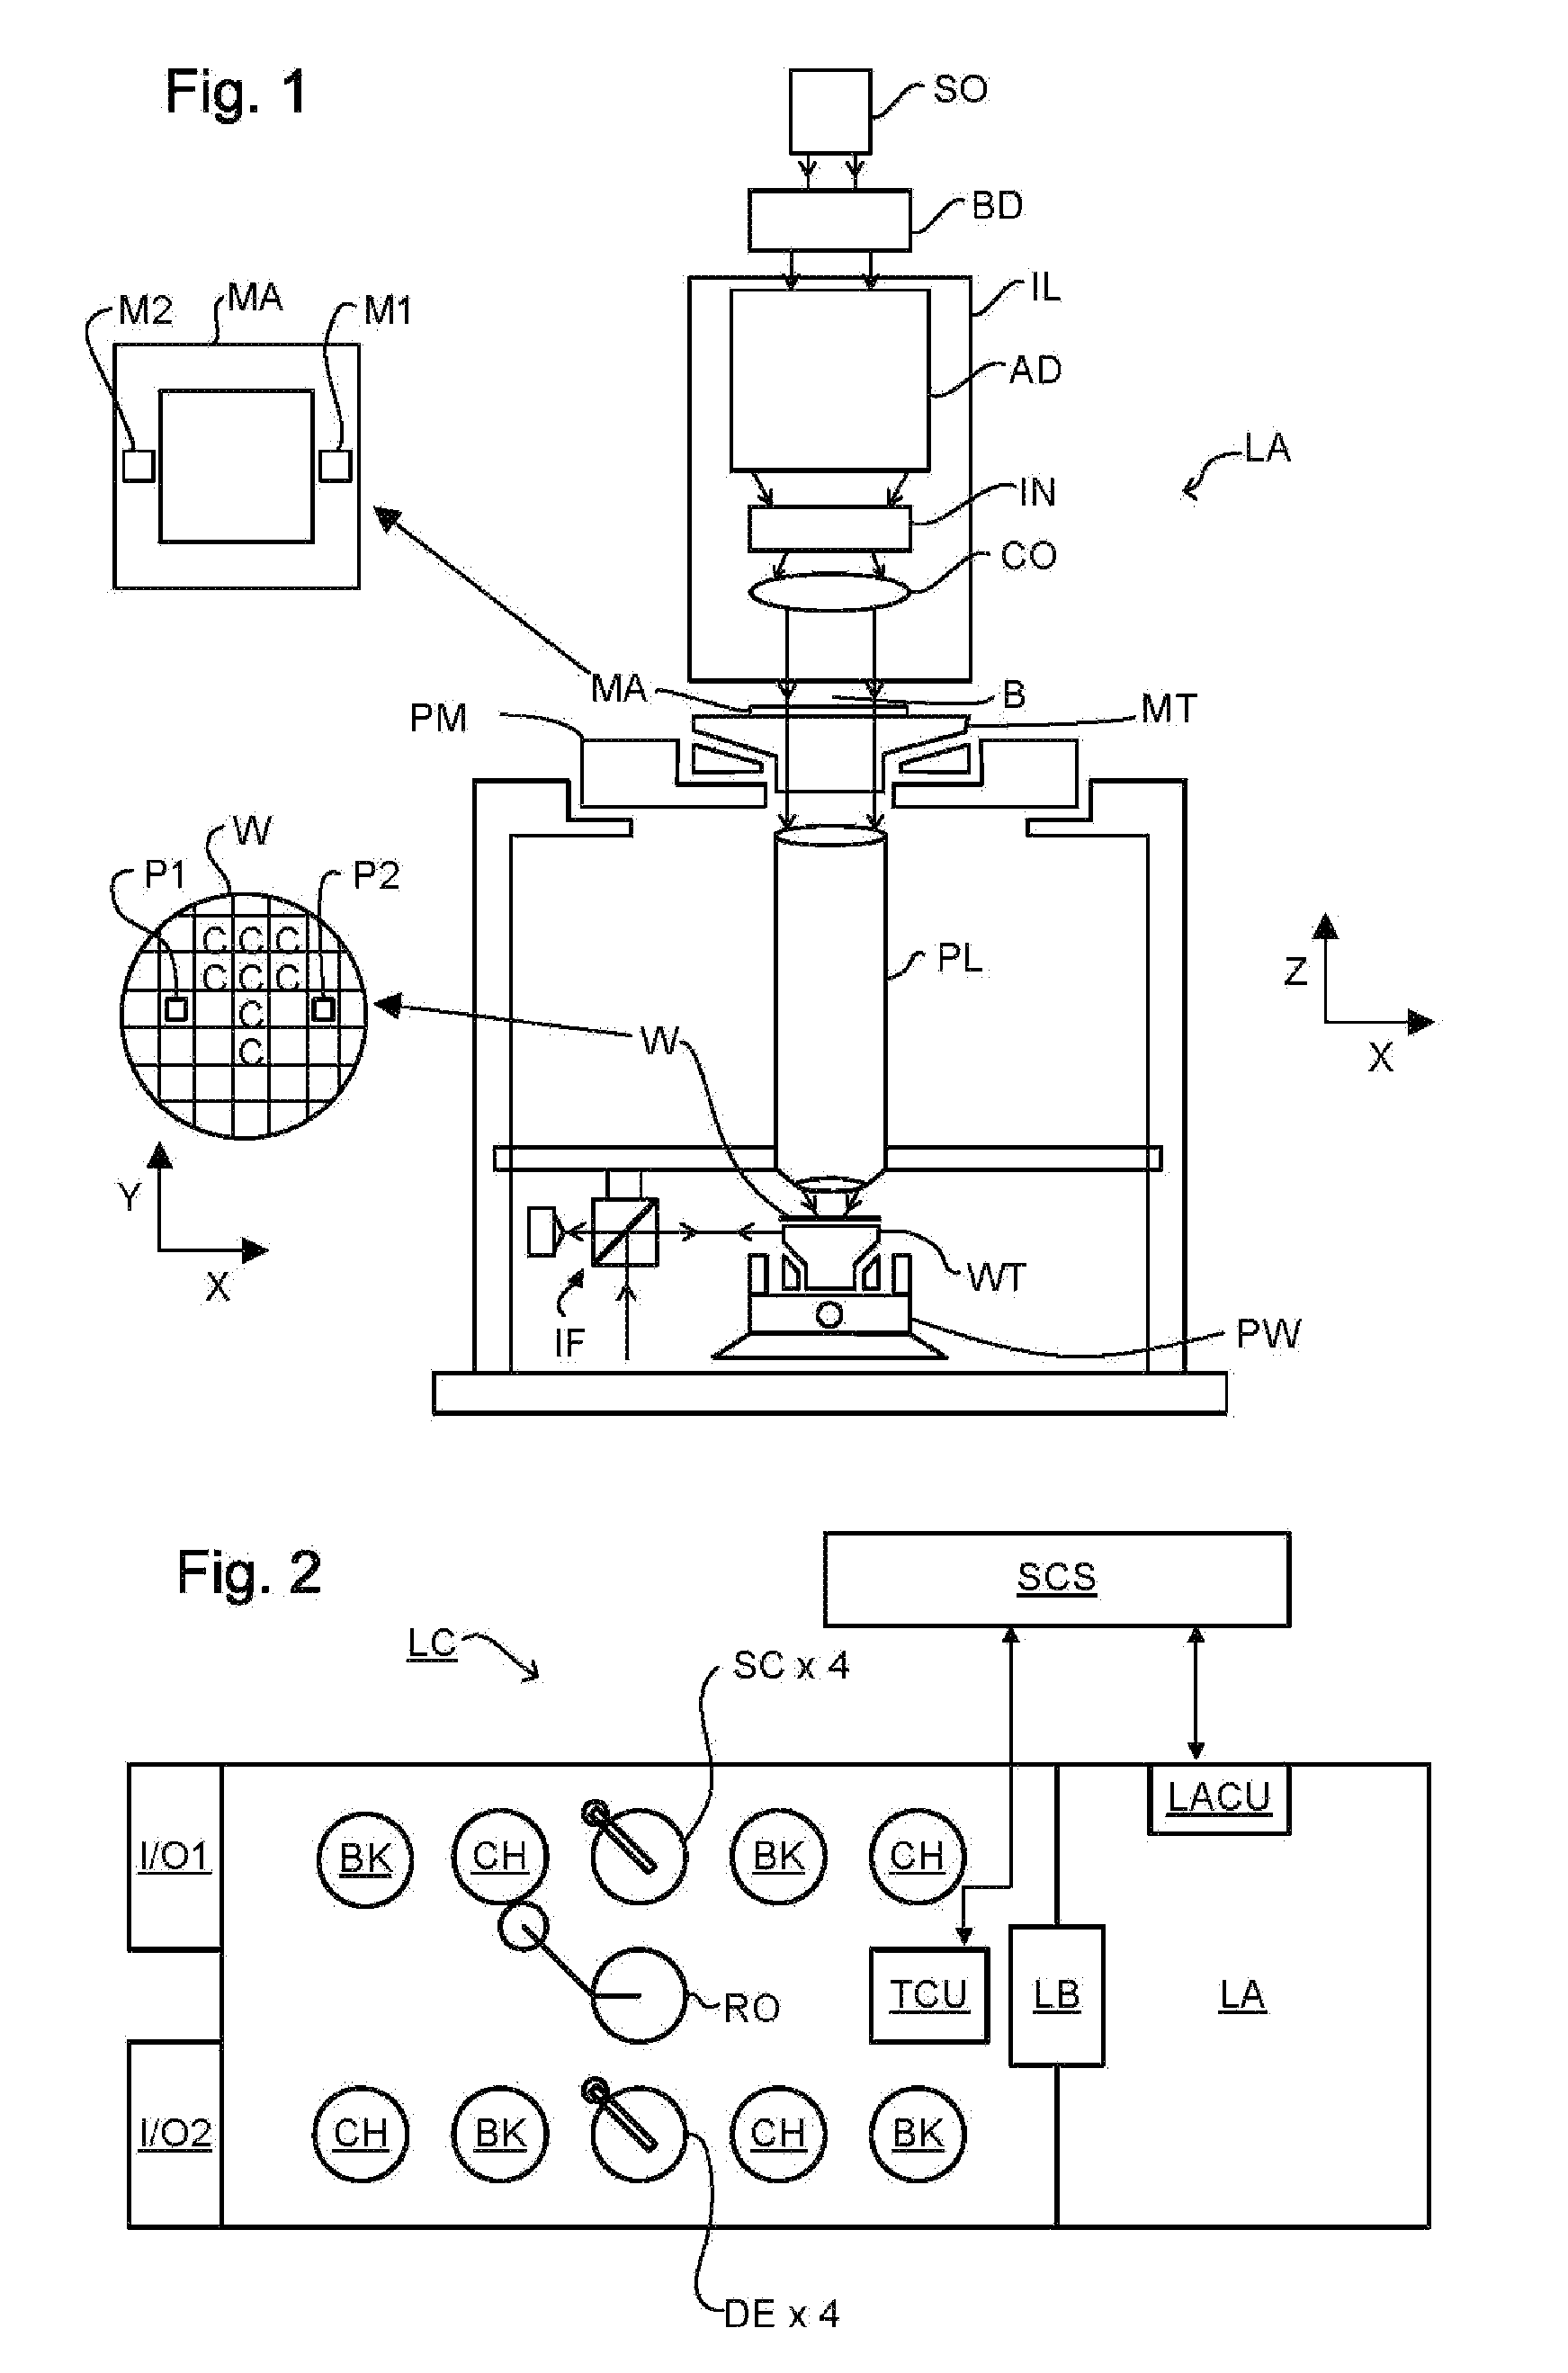 Producing a Marker Pattern and Measurement of an Exposure-Related Property of an Exposure Apparatus